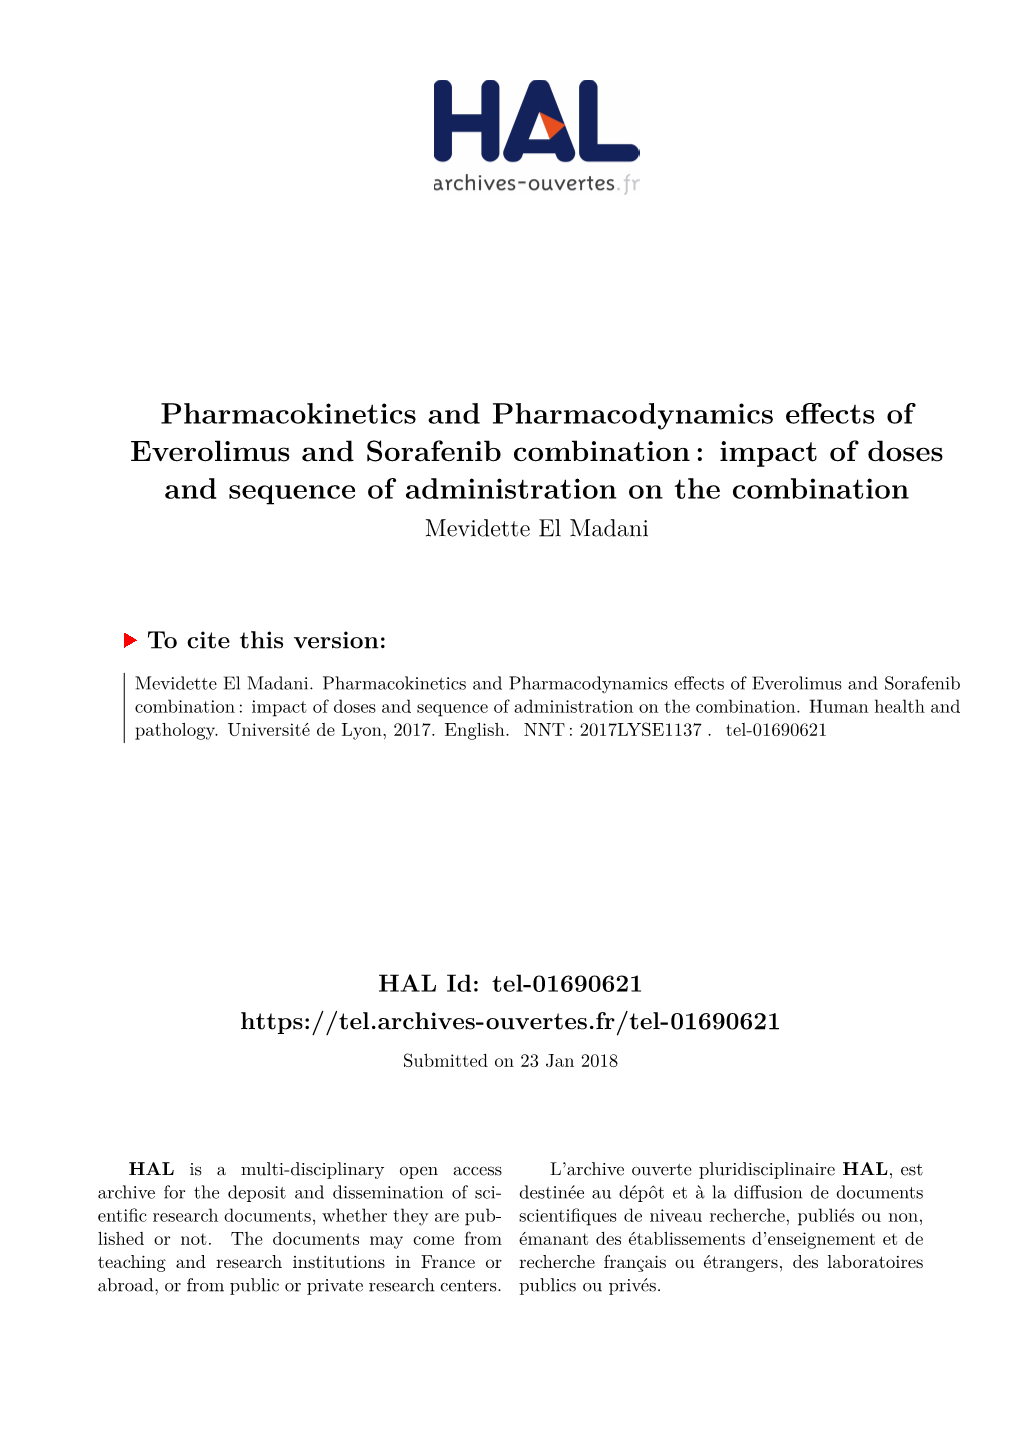 Pharmacokinetics and Pharmacodynamics Effects of Everolimus and Sorafenib Combination: Impact of Doses and Sequence of Administr